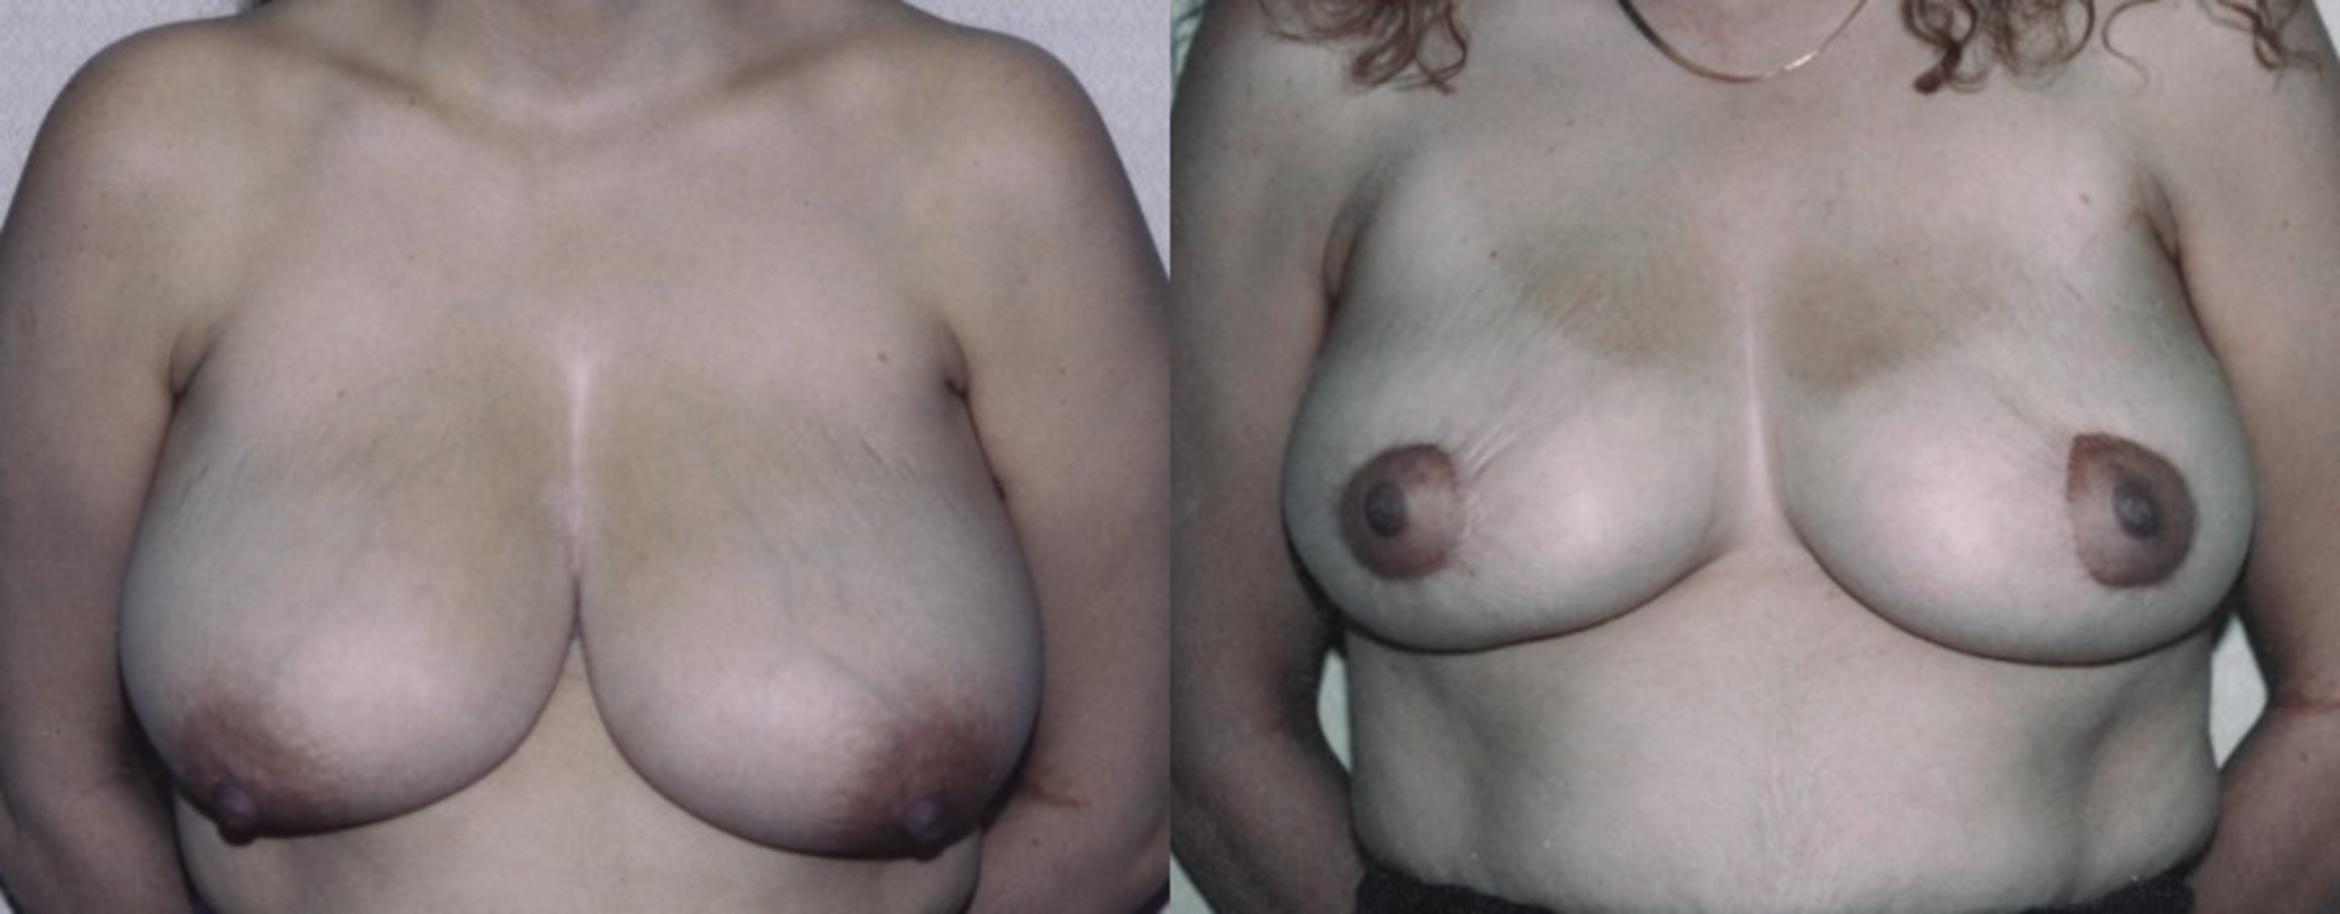 Breast Reduction Before & After Photo | New Jersey & Pennsylvania,  | The Derm Group